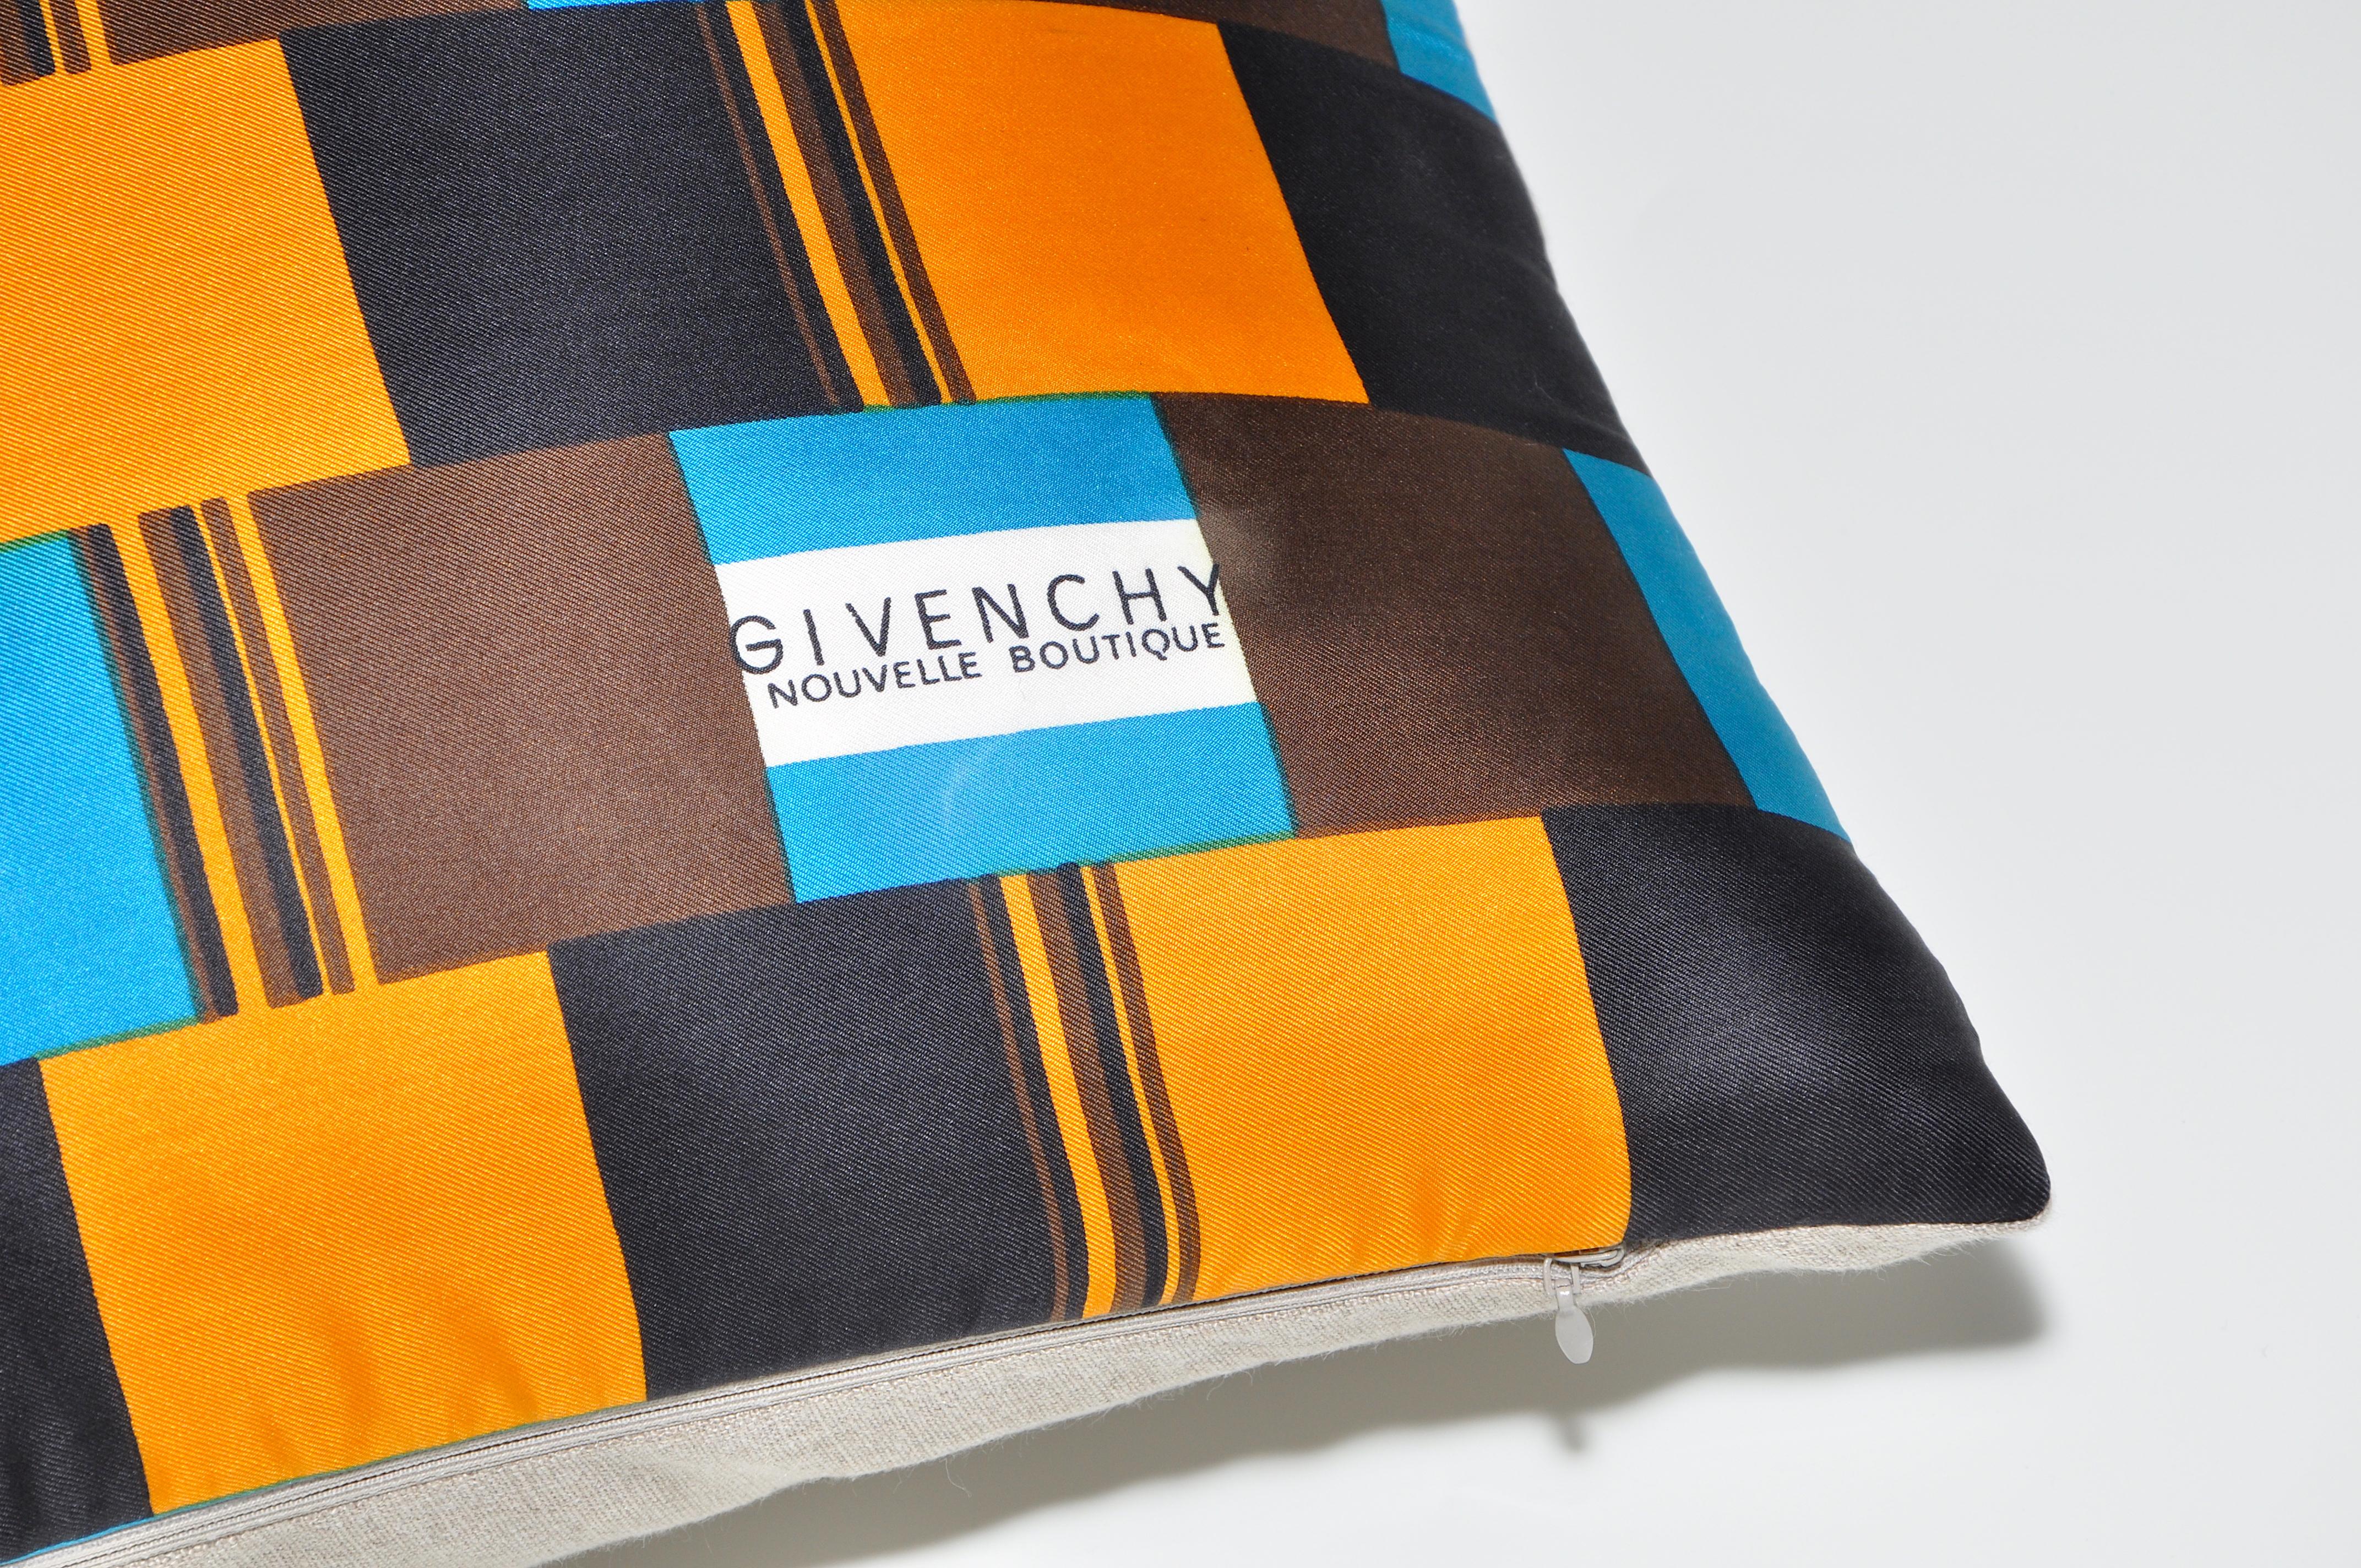 This cushion is a one of a kind and part of a sustainability project. It has been created from an upcycled, recycled luxury fabric, used with the intentions of promoting a more eco-friendly environment by using already existing materials. We both